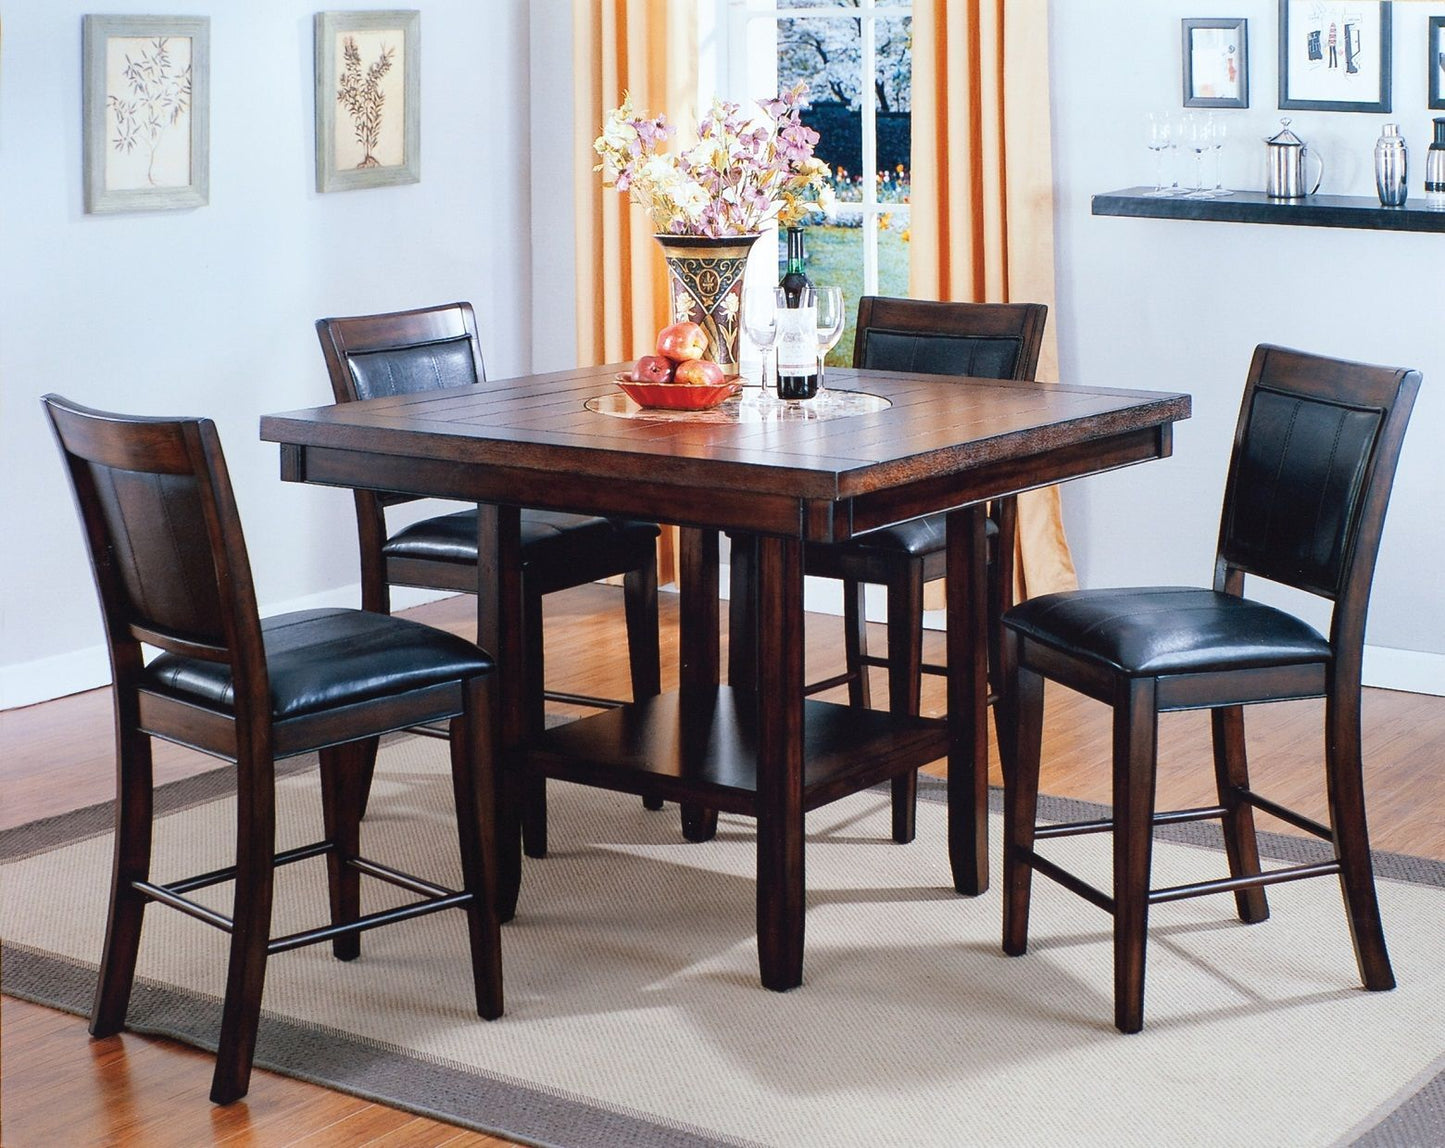 Fulton Counter Height Set (table and 4 chairs) by Crown Mark